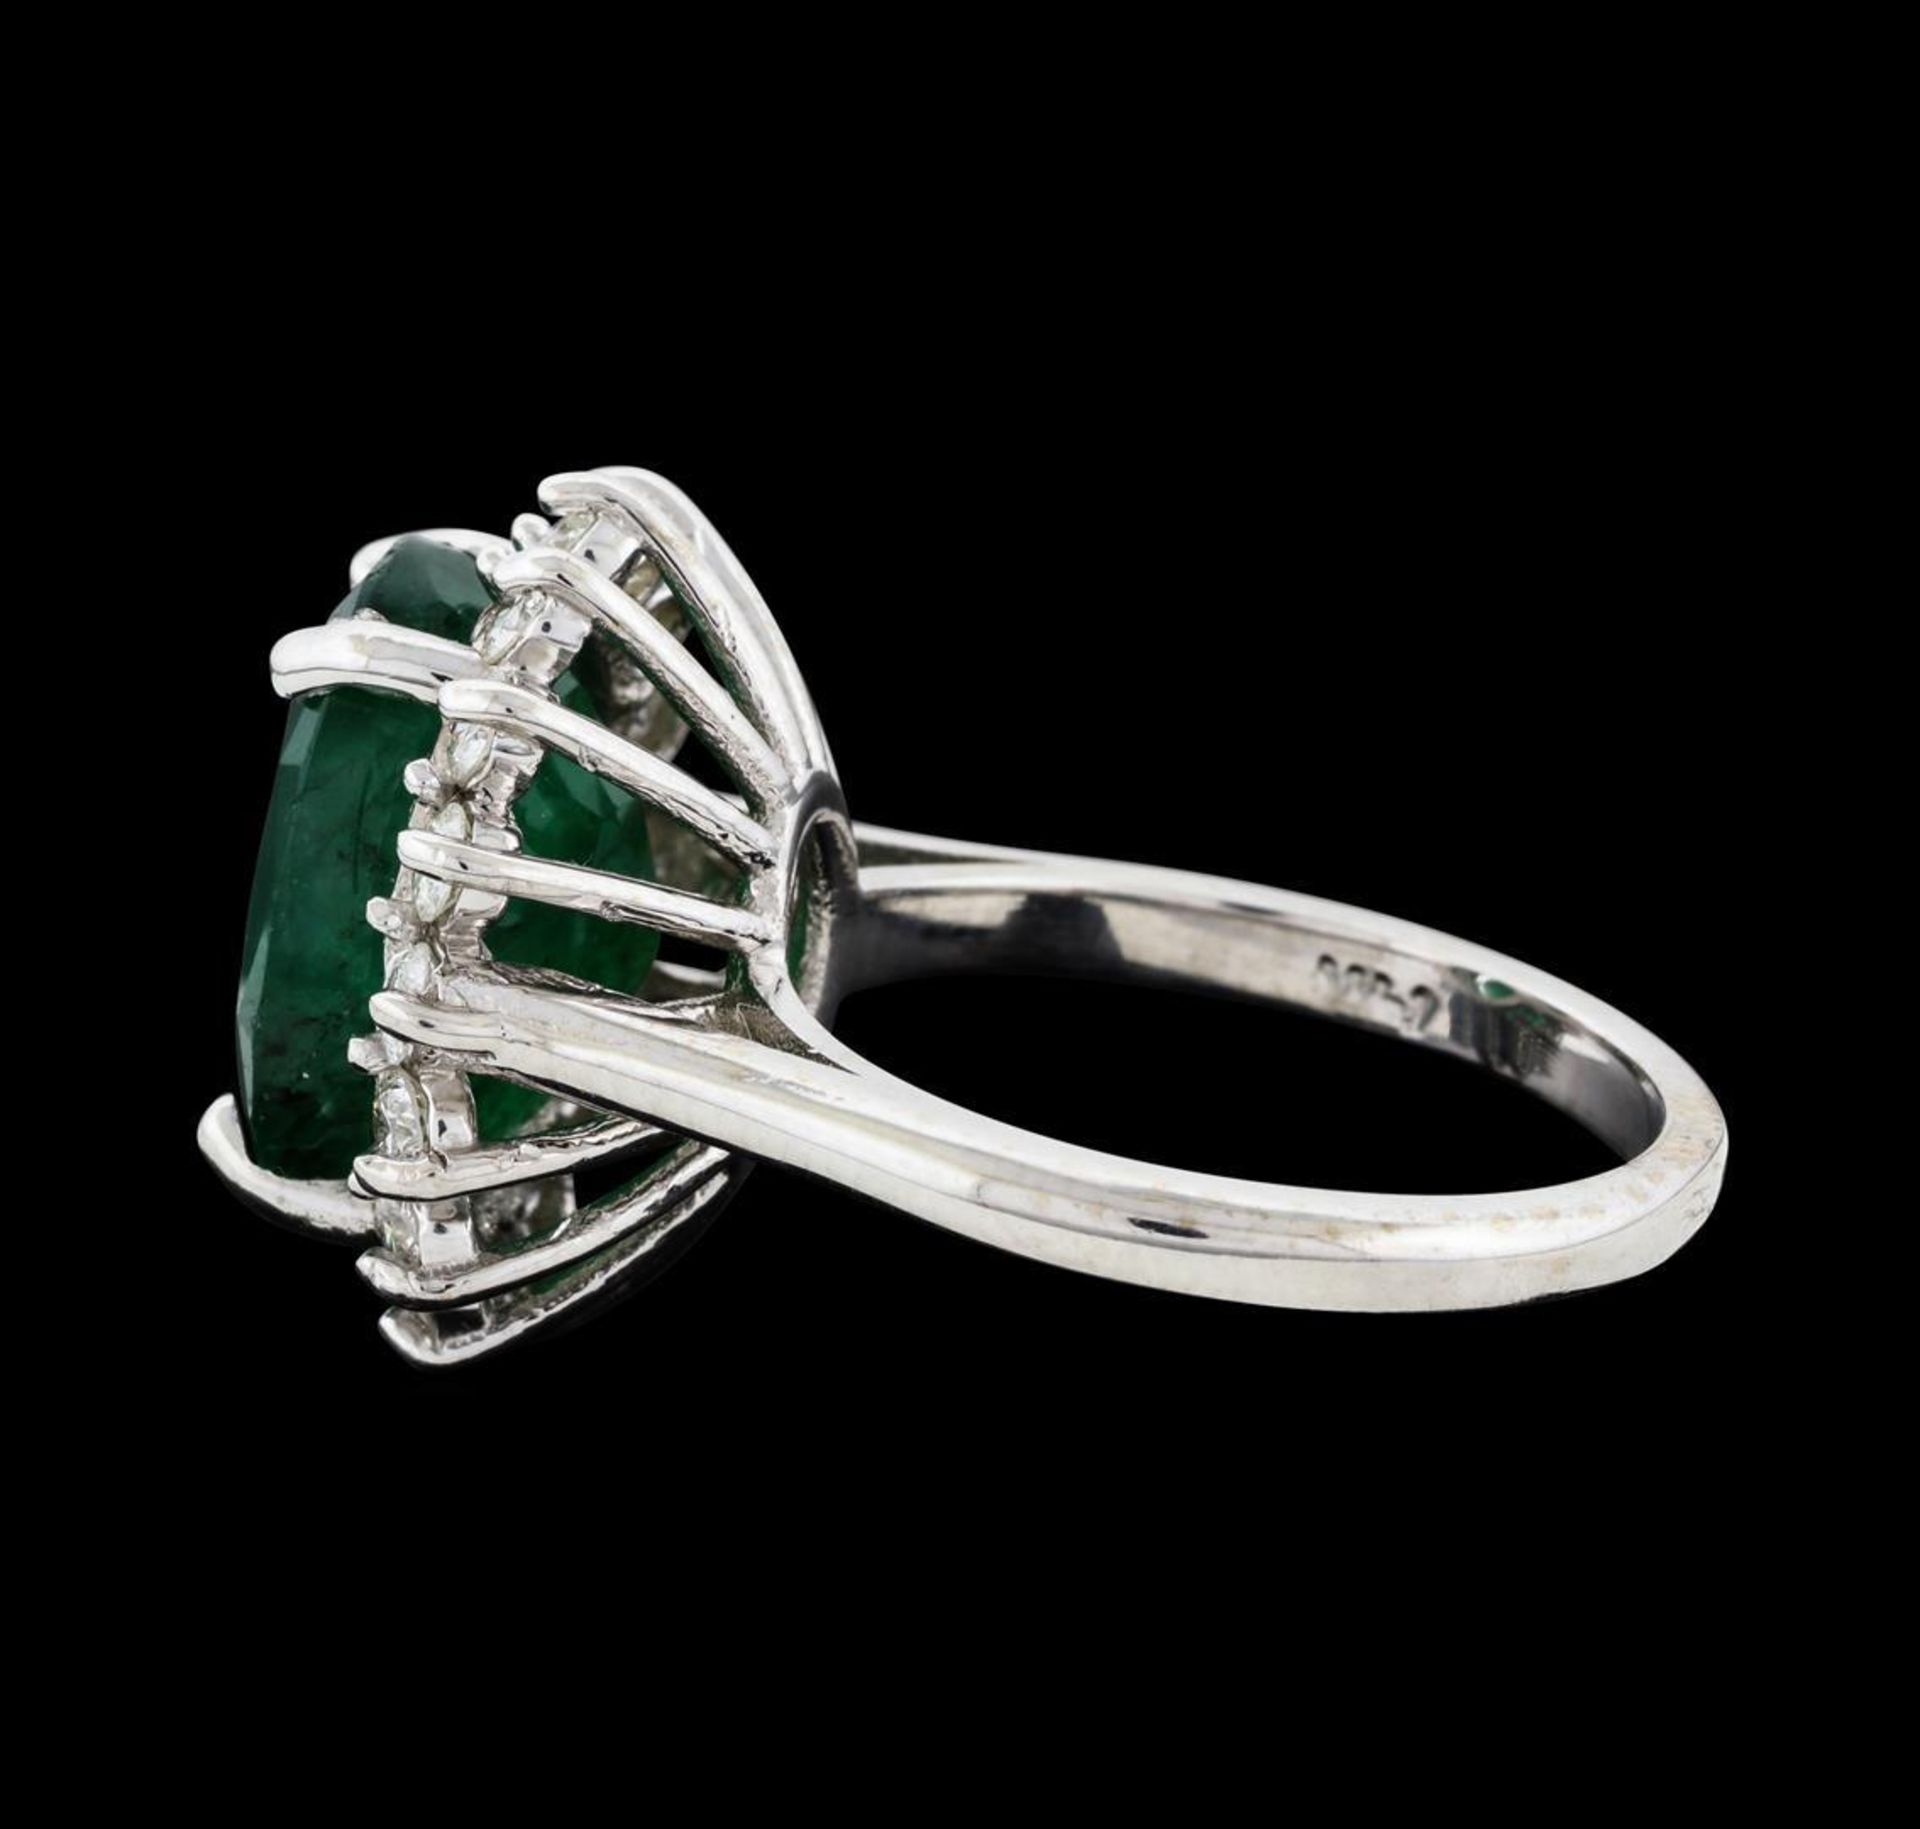 6.51 ctw Emerald and Diamond Ring - 14KT White Gold - Image 3 of 5